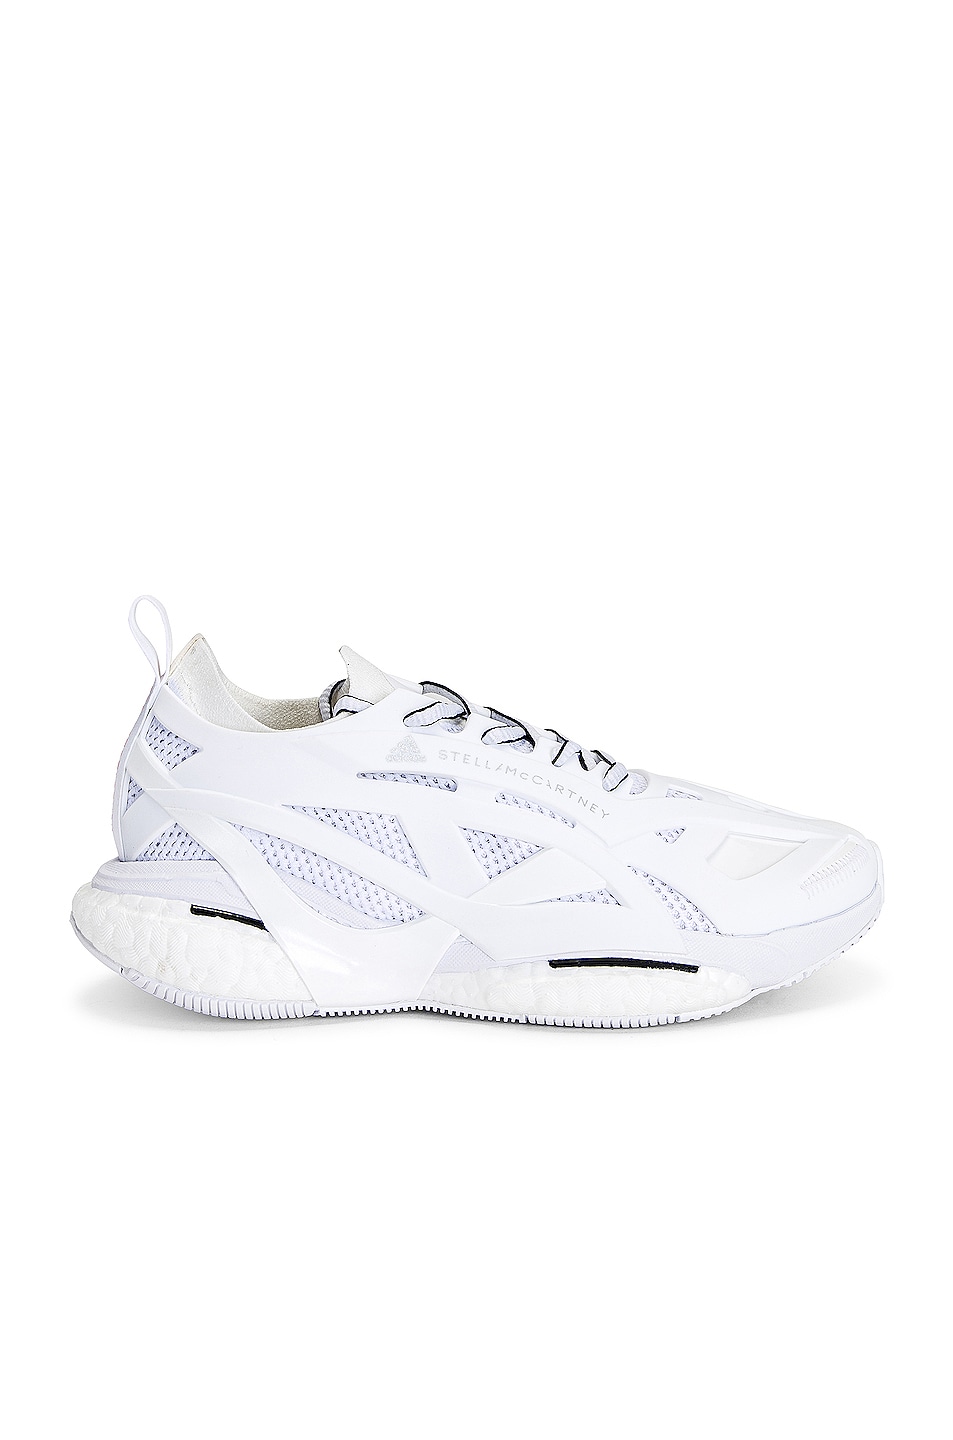 Image 1 of adidas by Stella McCartney Solarglide Sneaker in White, Active Orange & White Vapour